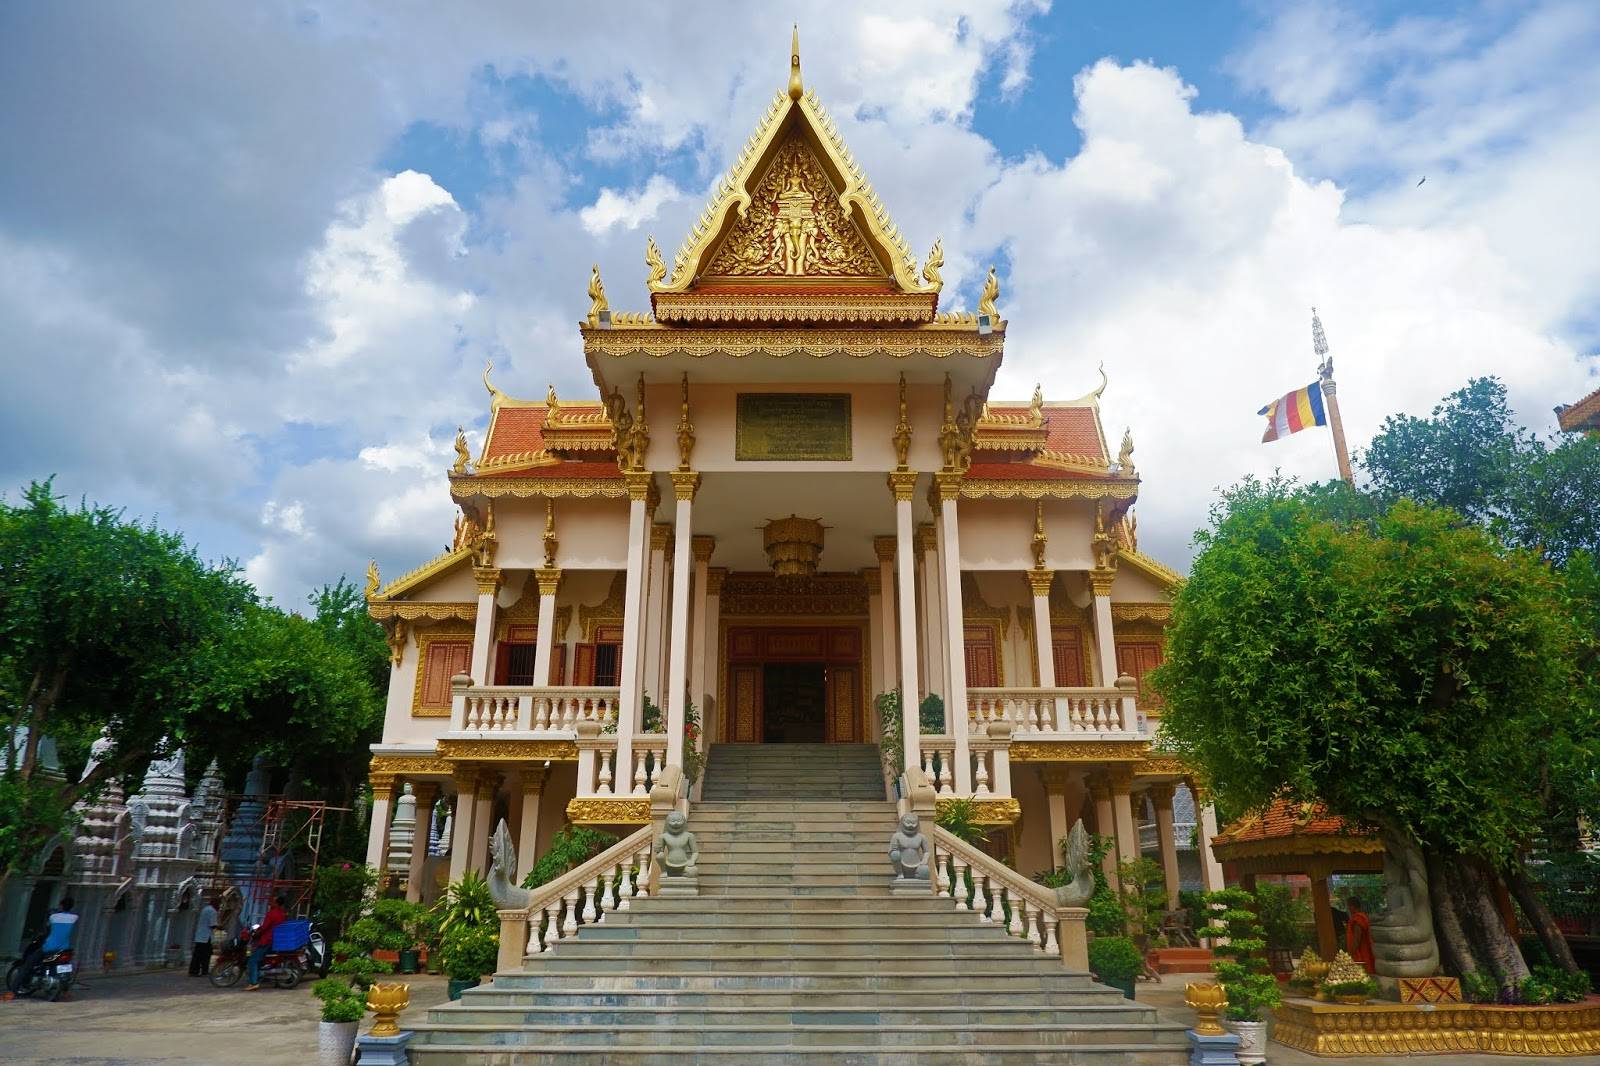 25 best things to do in phnom penh (cambodia) - the crazy tourist